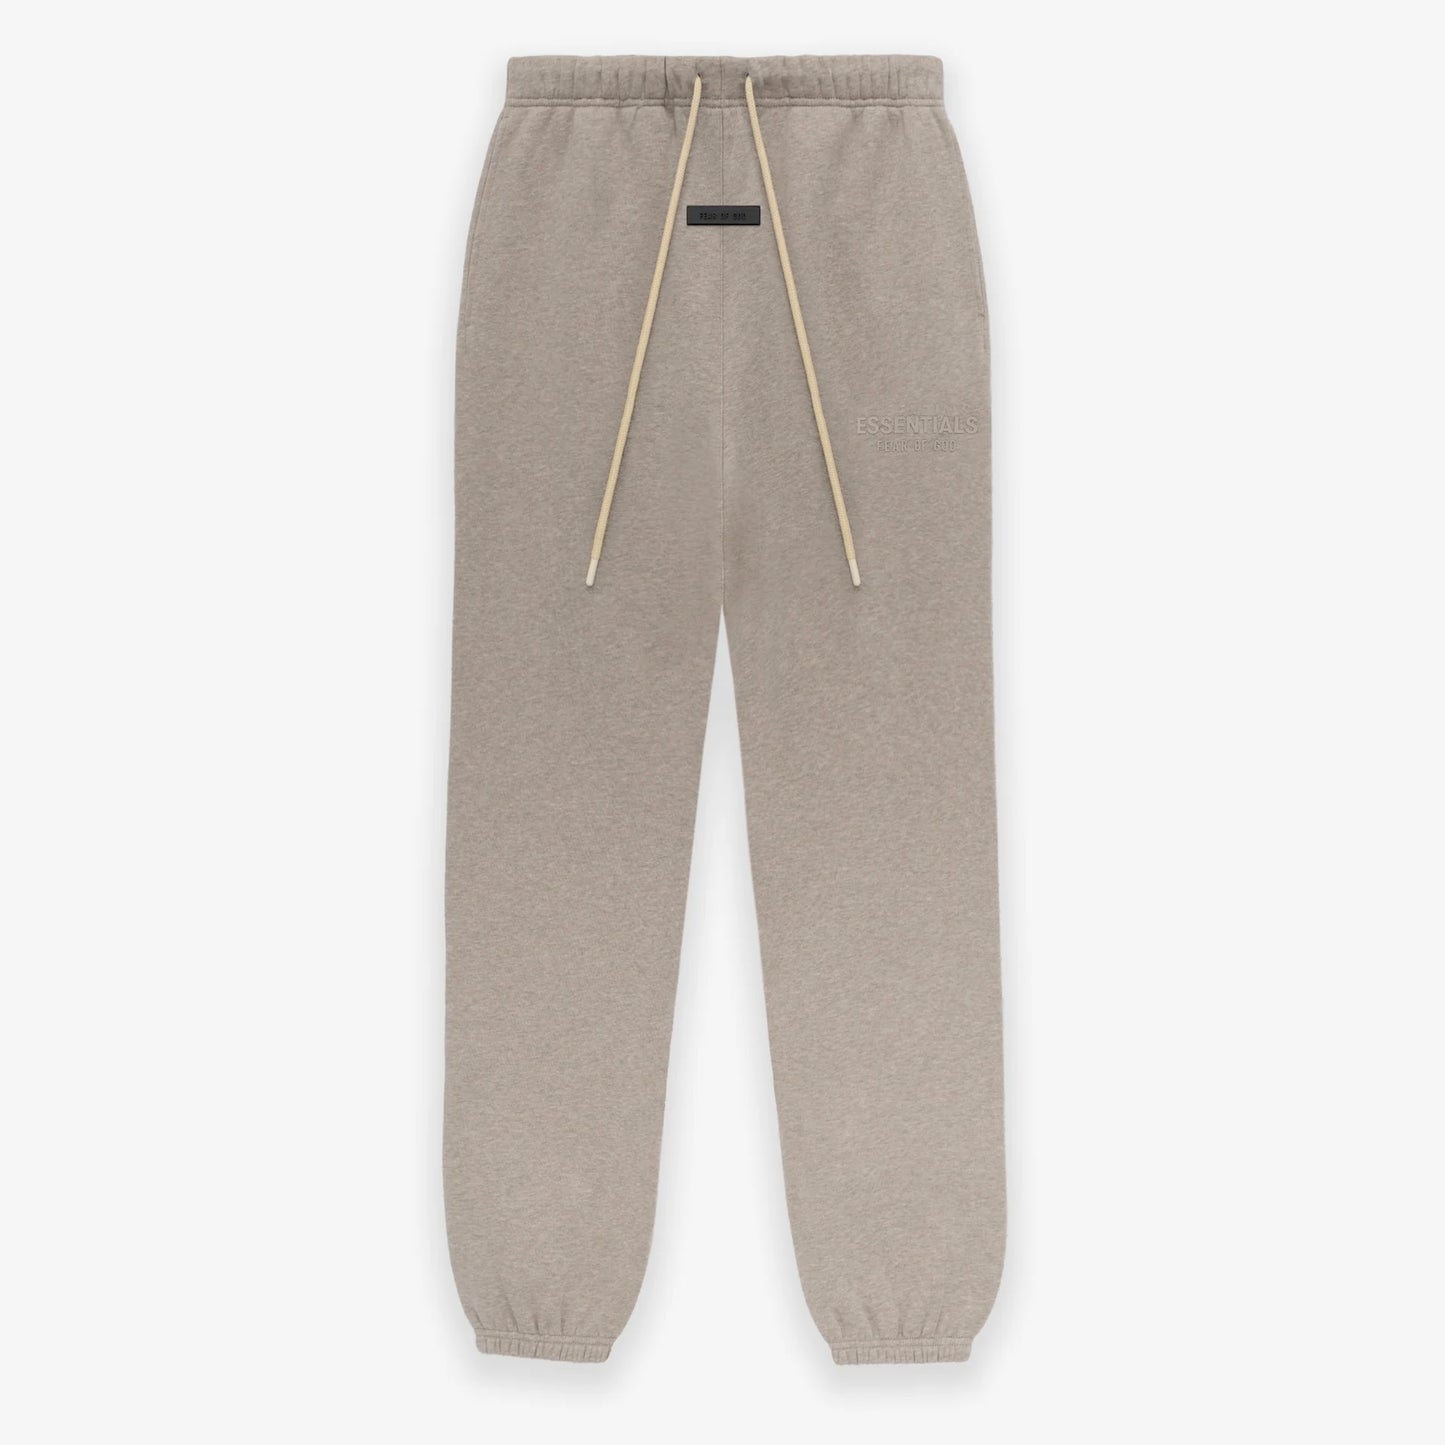 Fear of God Essentials Core Heather Sweatpants Front View